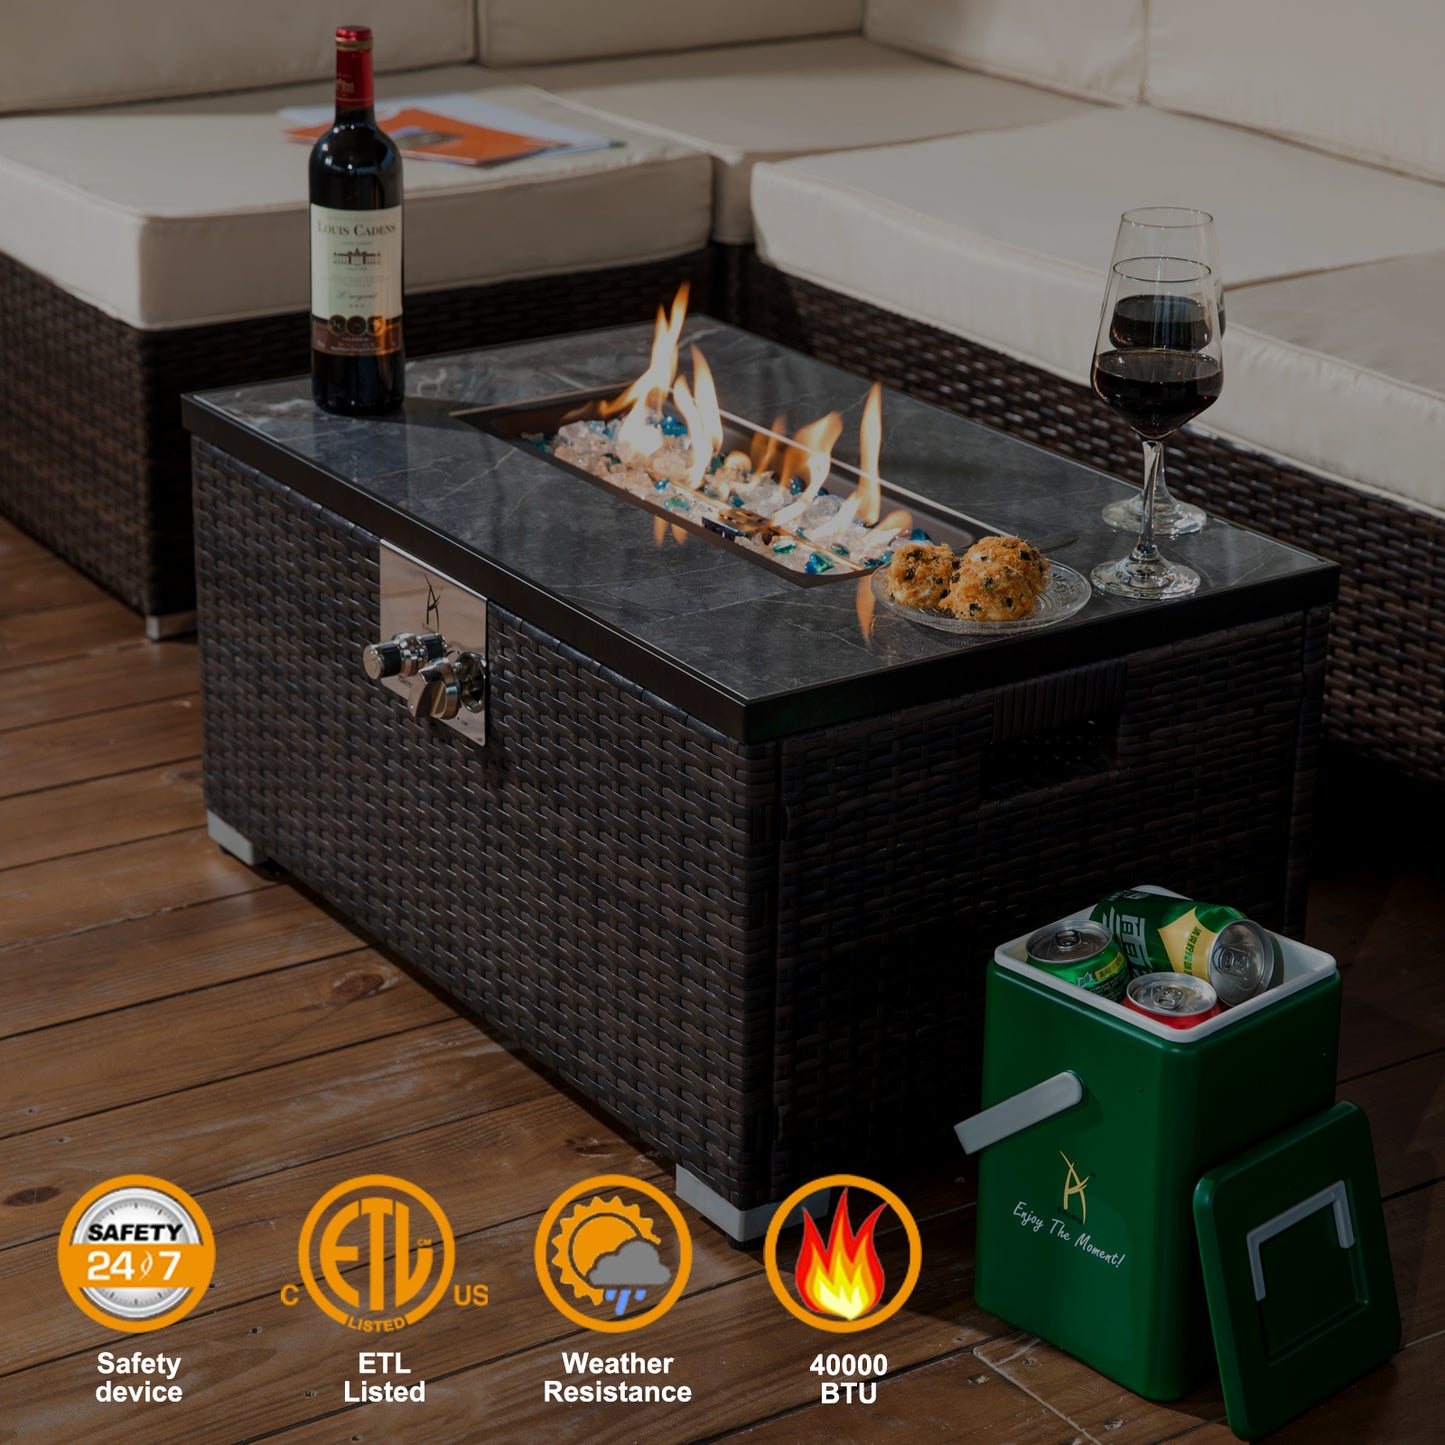 32'' Rectangular Wicker Outdoor Fire Pit Table with Propane Tank Cover